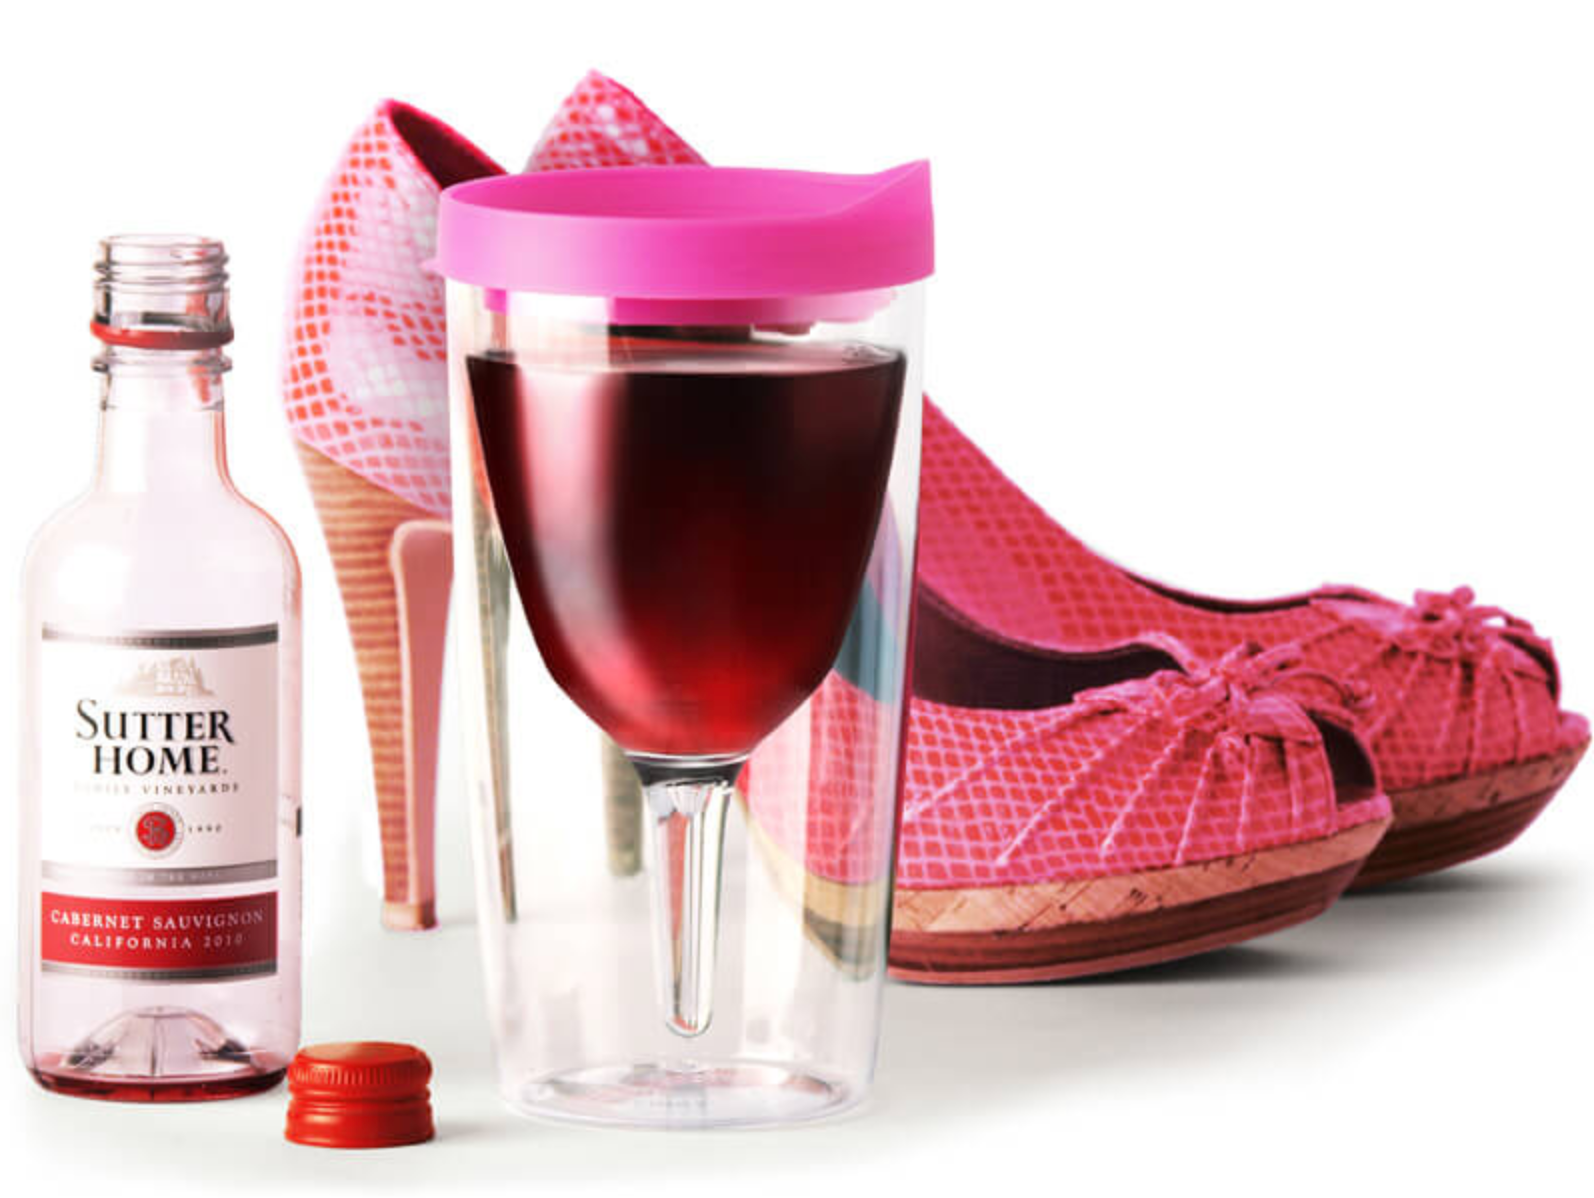 Portable sip cup wine glasses are now a thing you can buy, The Manc